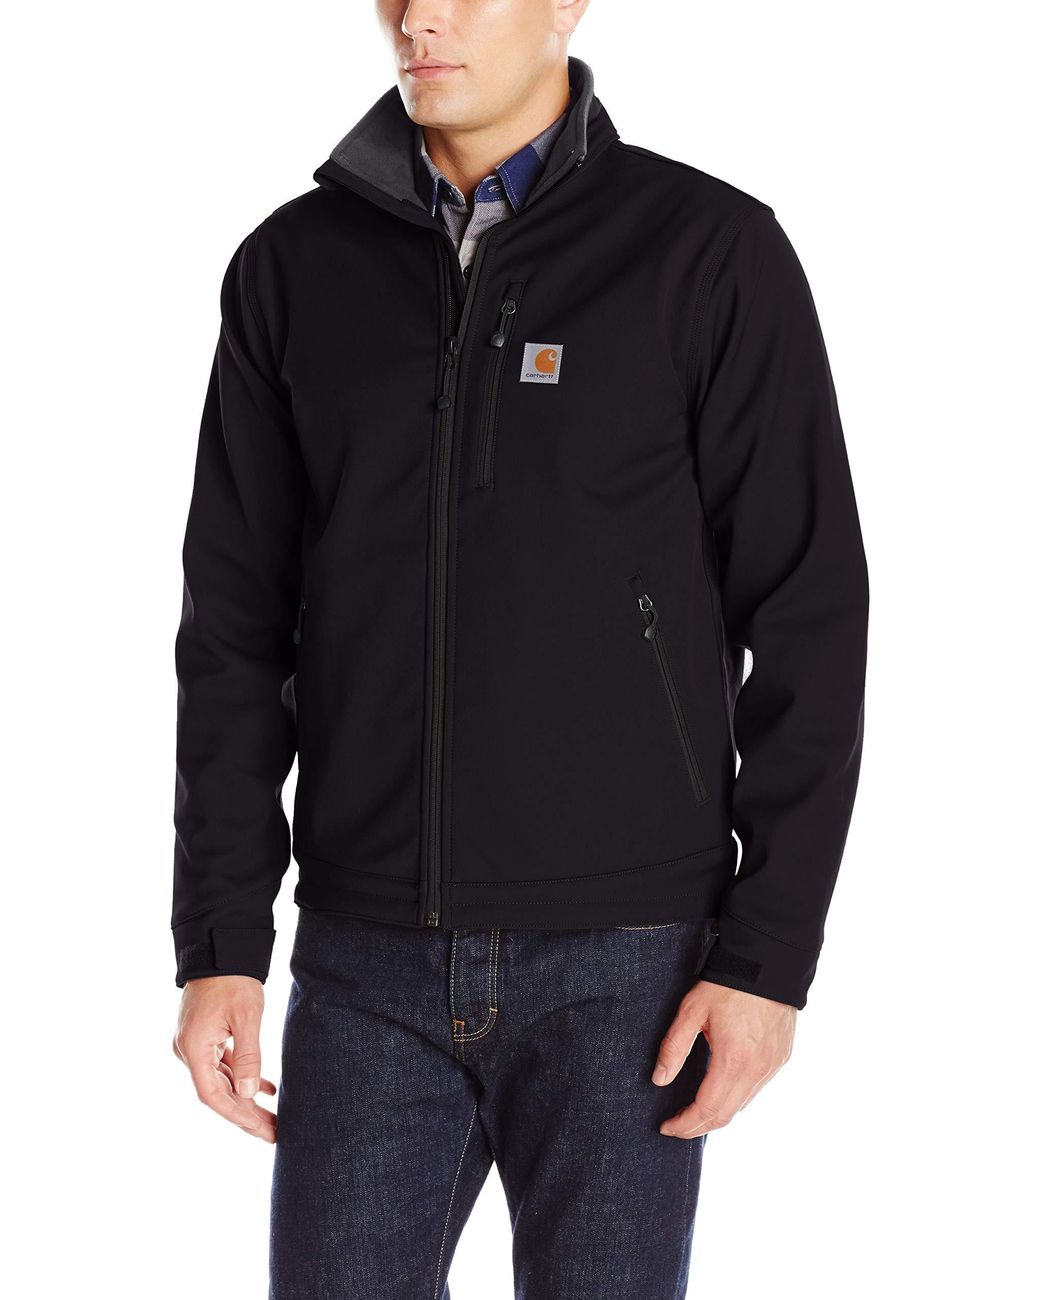 Carhartt Synthetic Crowley Jacket in Black for Men - Save 9% - Lyst